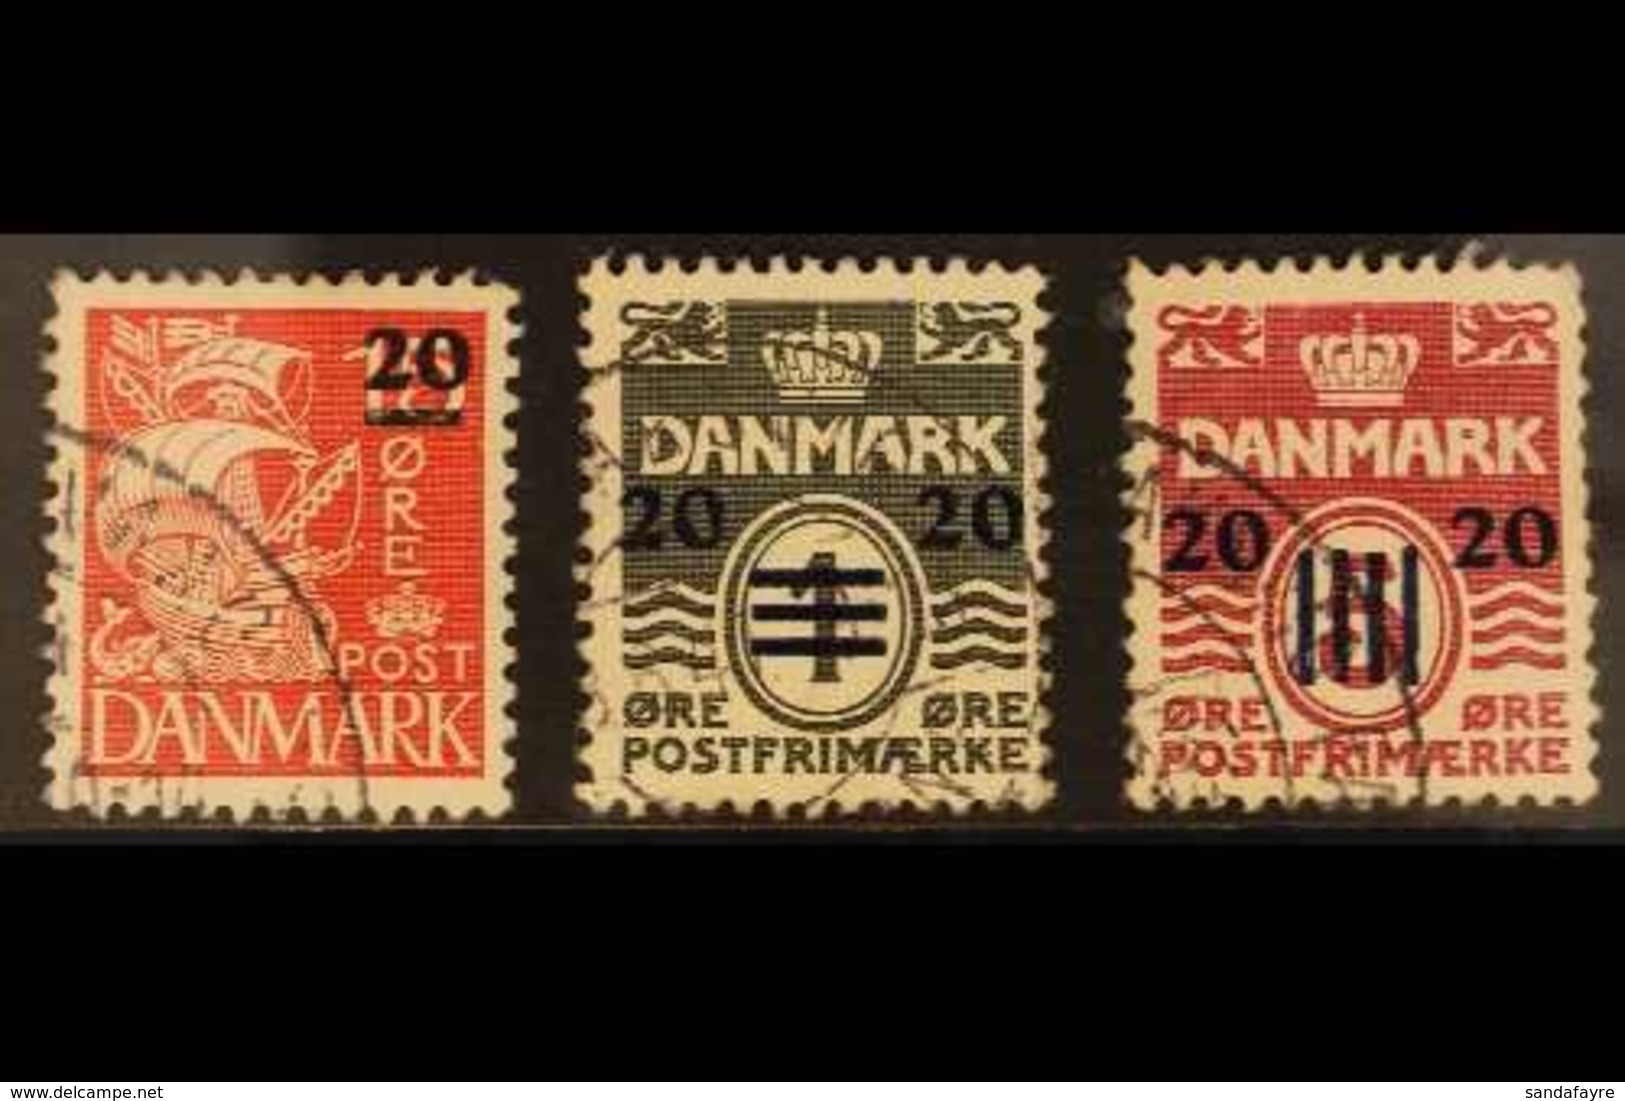 BRITISH OCCUPATION 1940-41 20 Ore Surcharges On Stamps Of Denmark, SG 1/3, Very Fine Used. (3 Stamps) For More Images, P - Faeroër